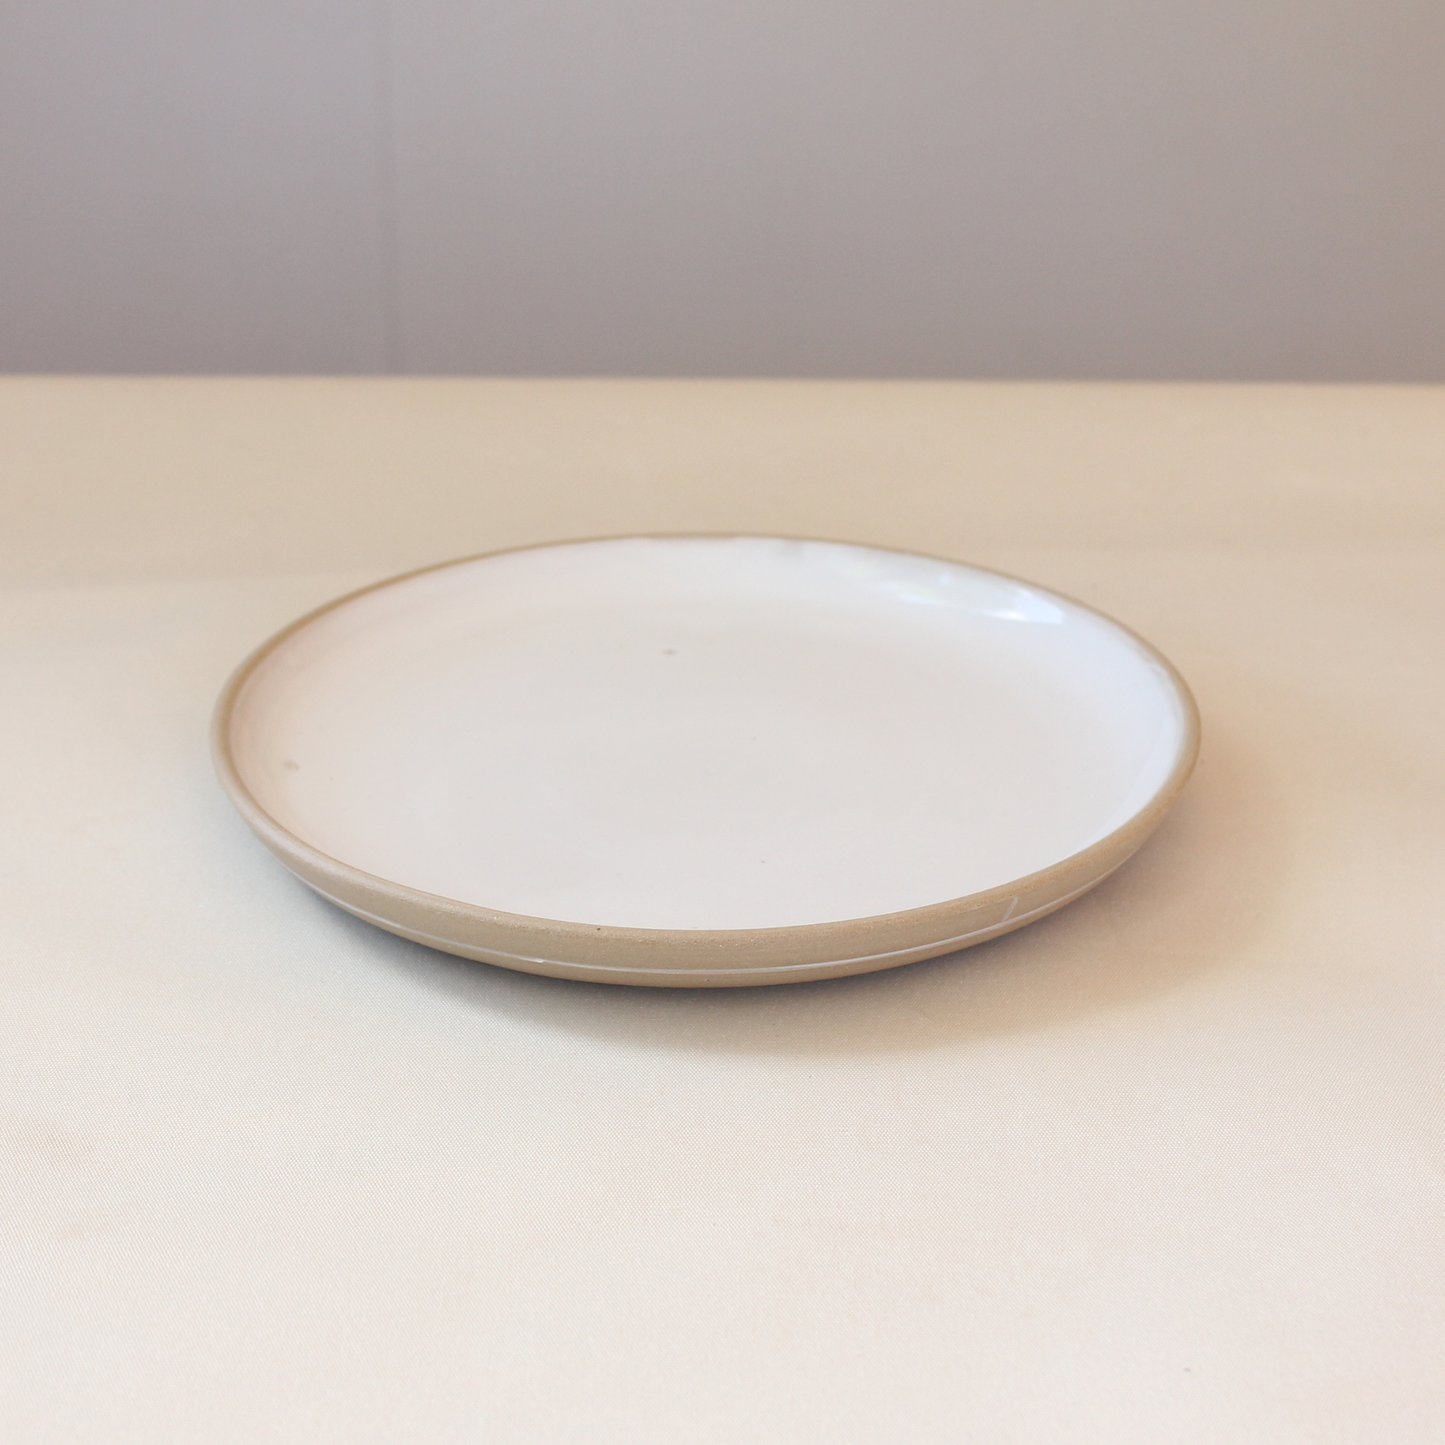 'Lines in Sand' Plates